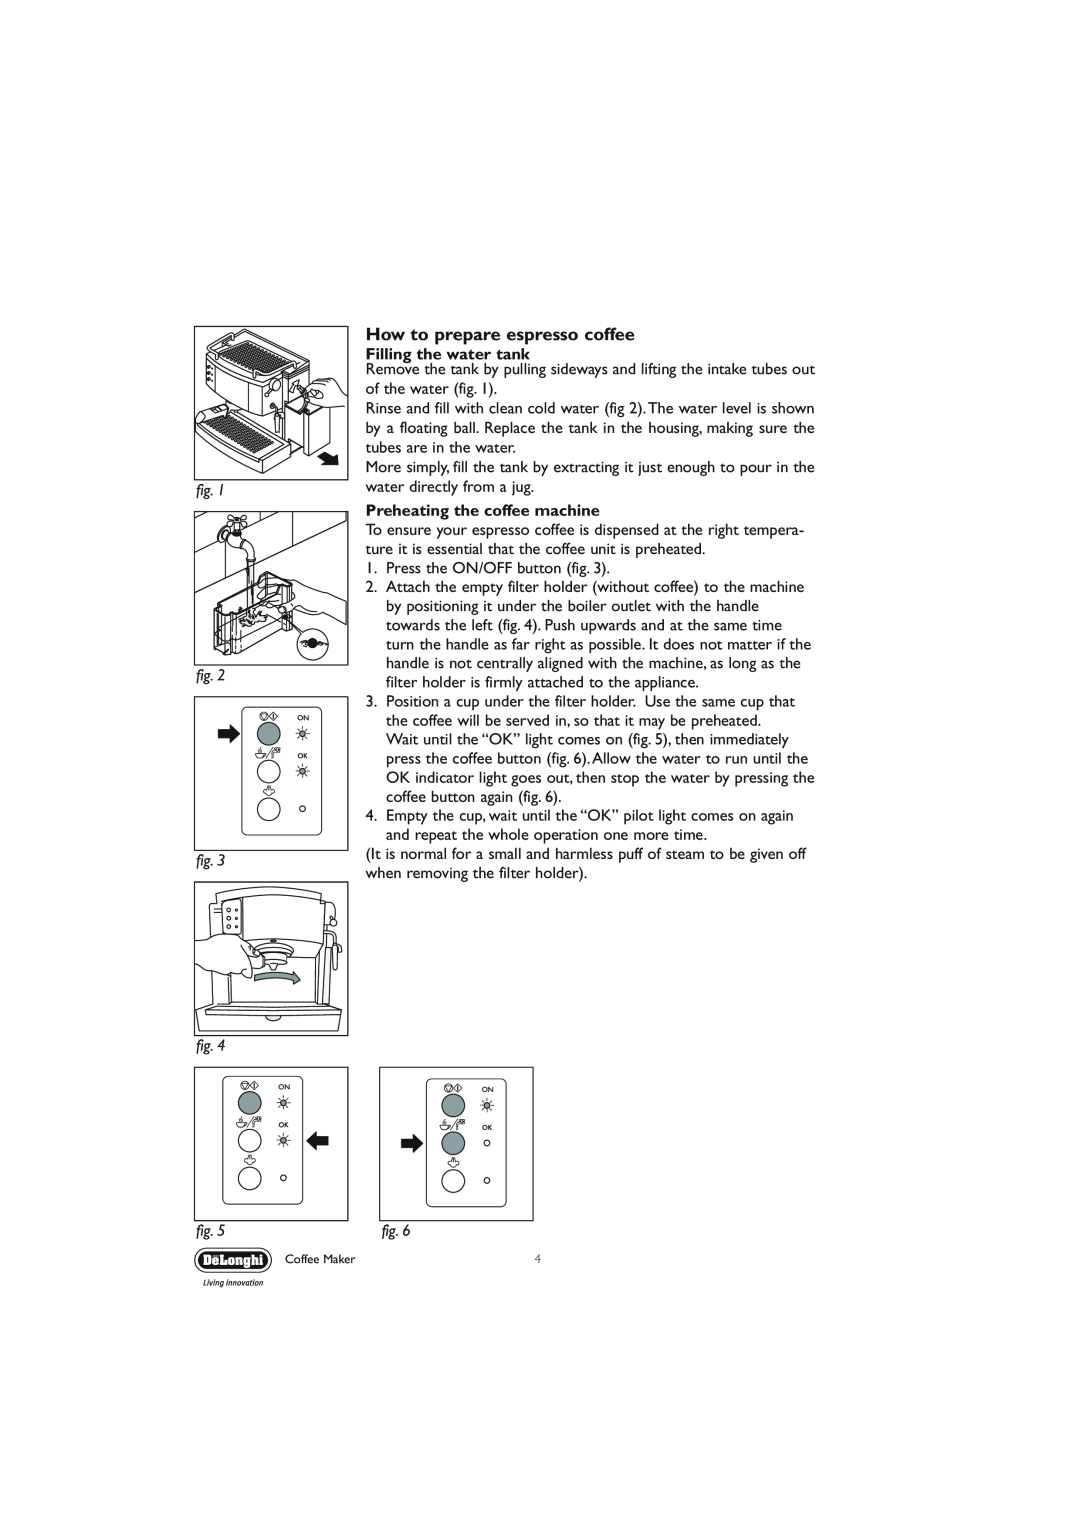 DeLonghi EC710 How to prepare espresso coffee, fig. fig. fig. fig, Filling the water tank, Preheating the coffee machine 